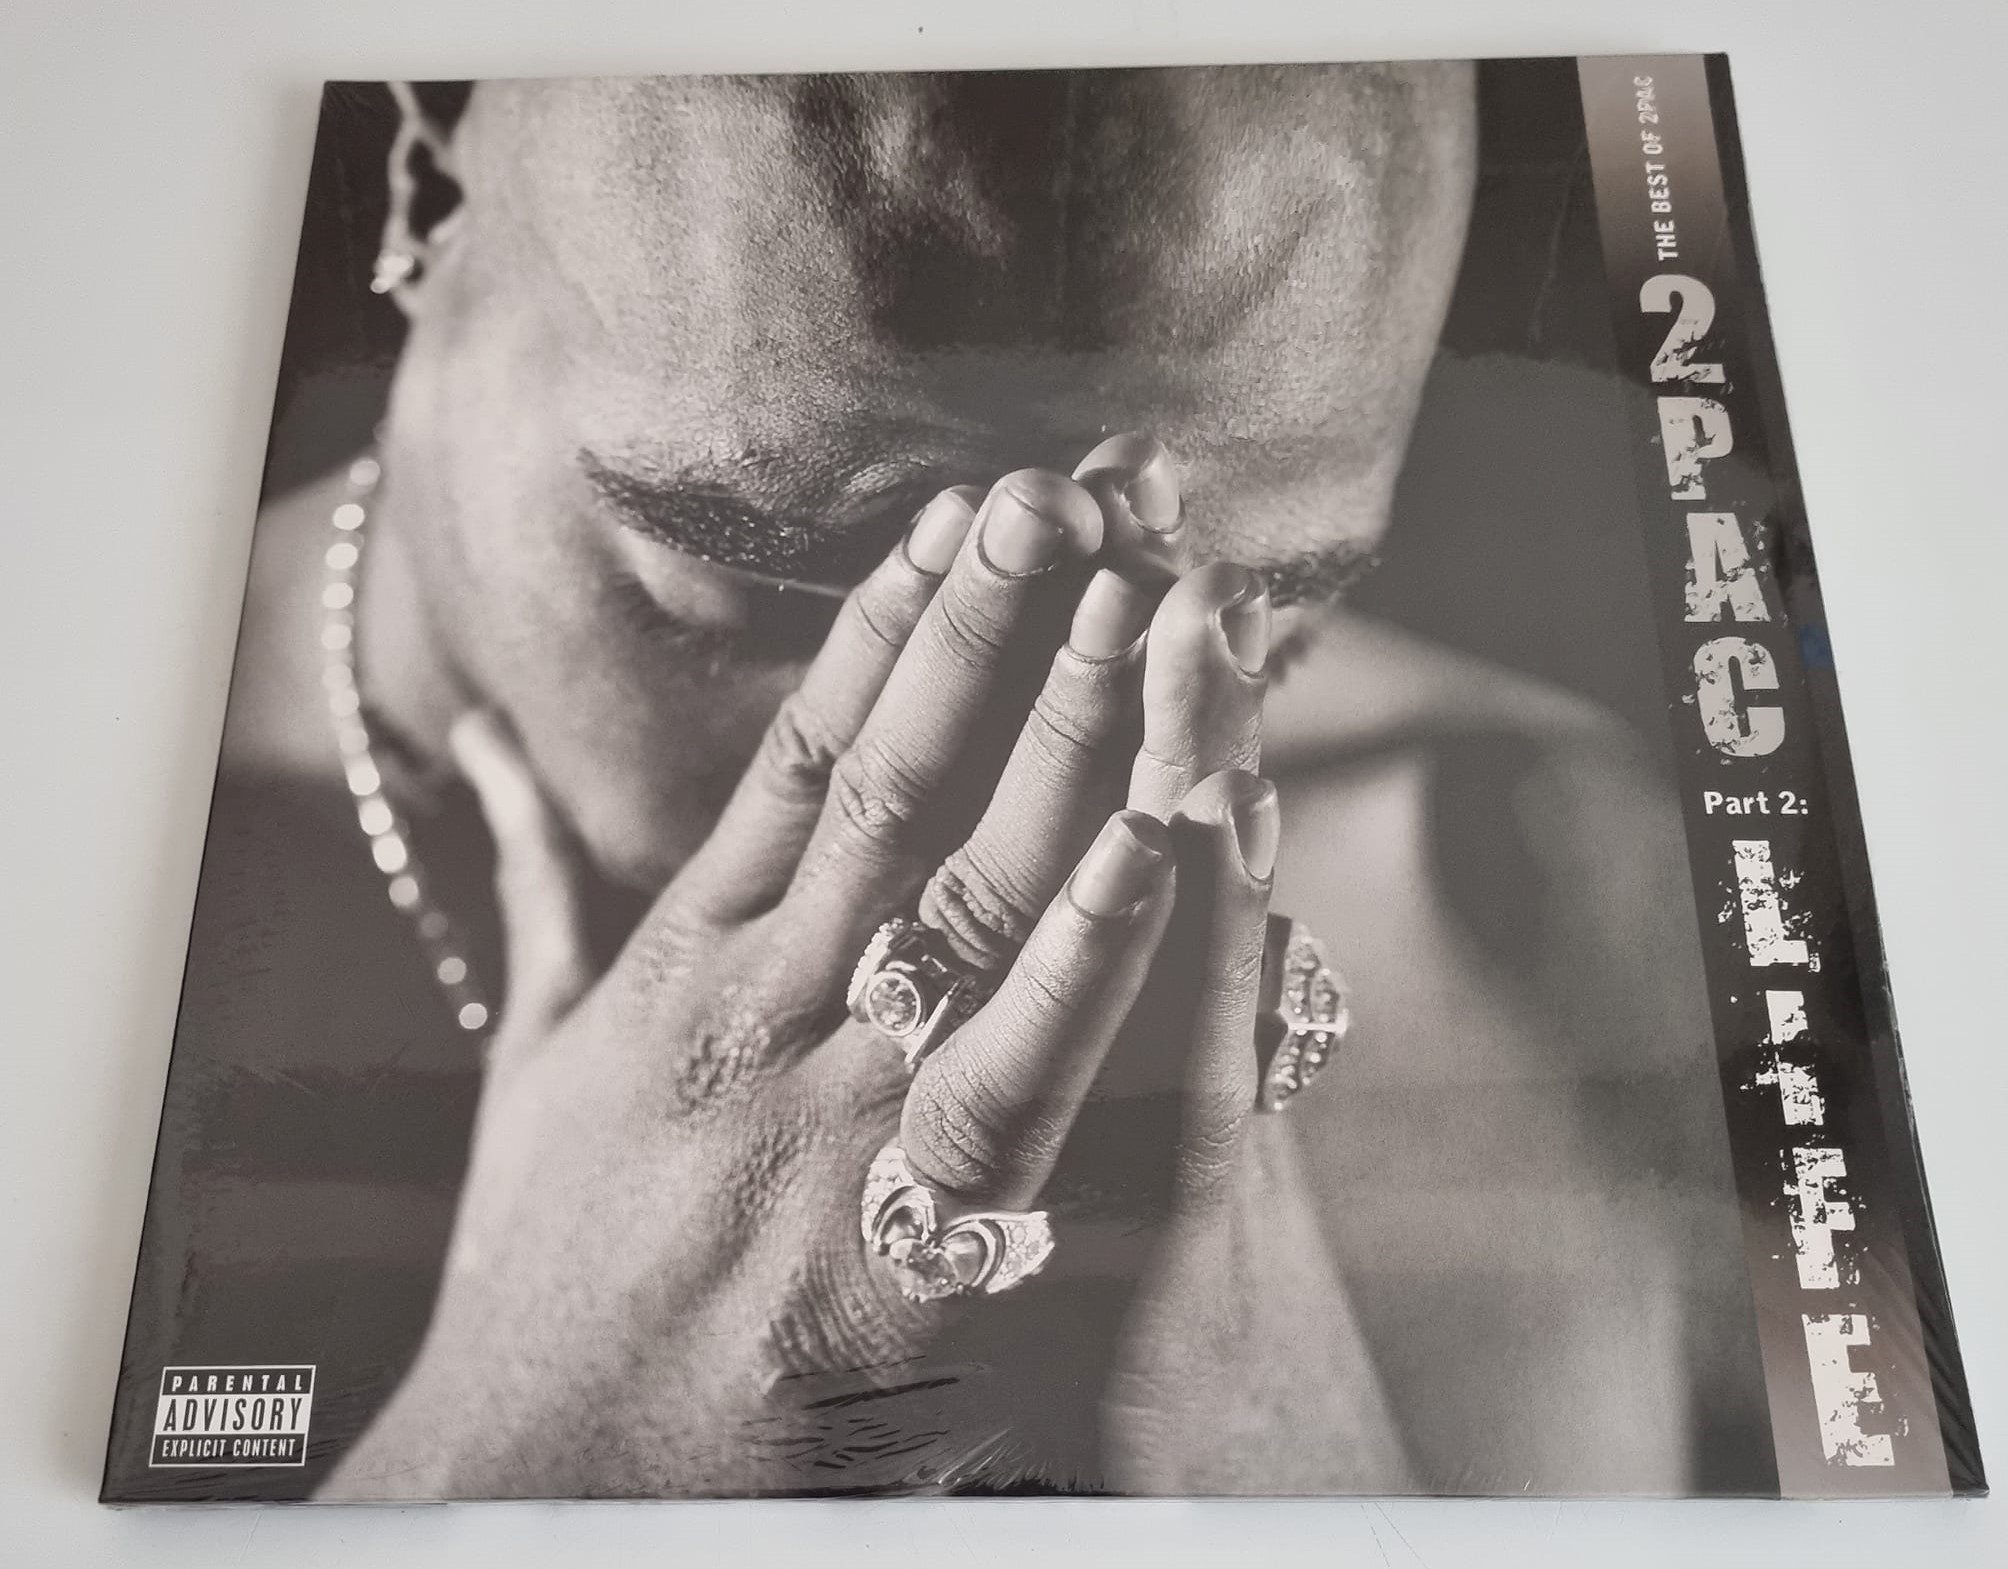 Buy this rare 2Pac record by clicking here